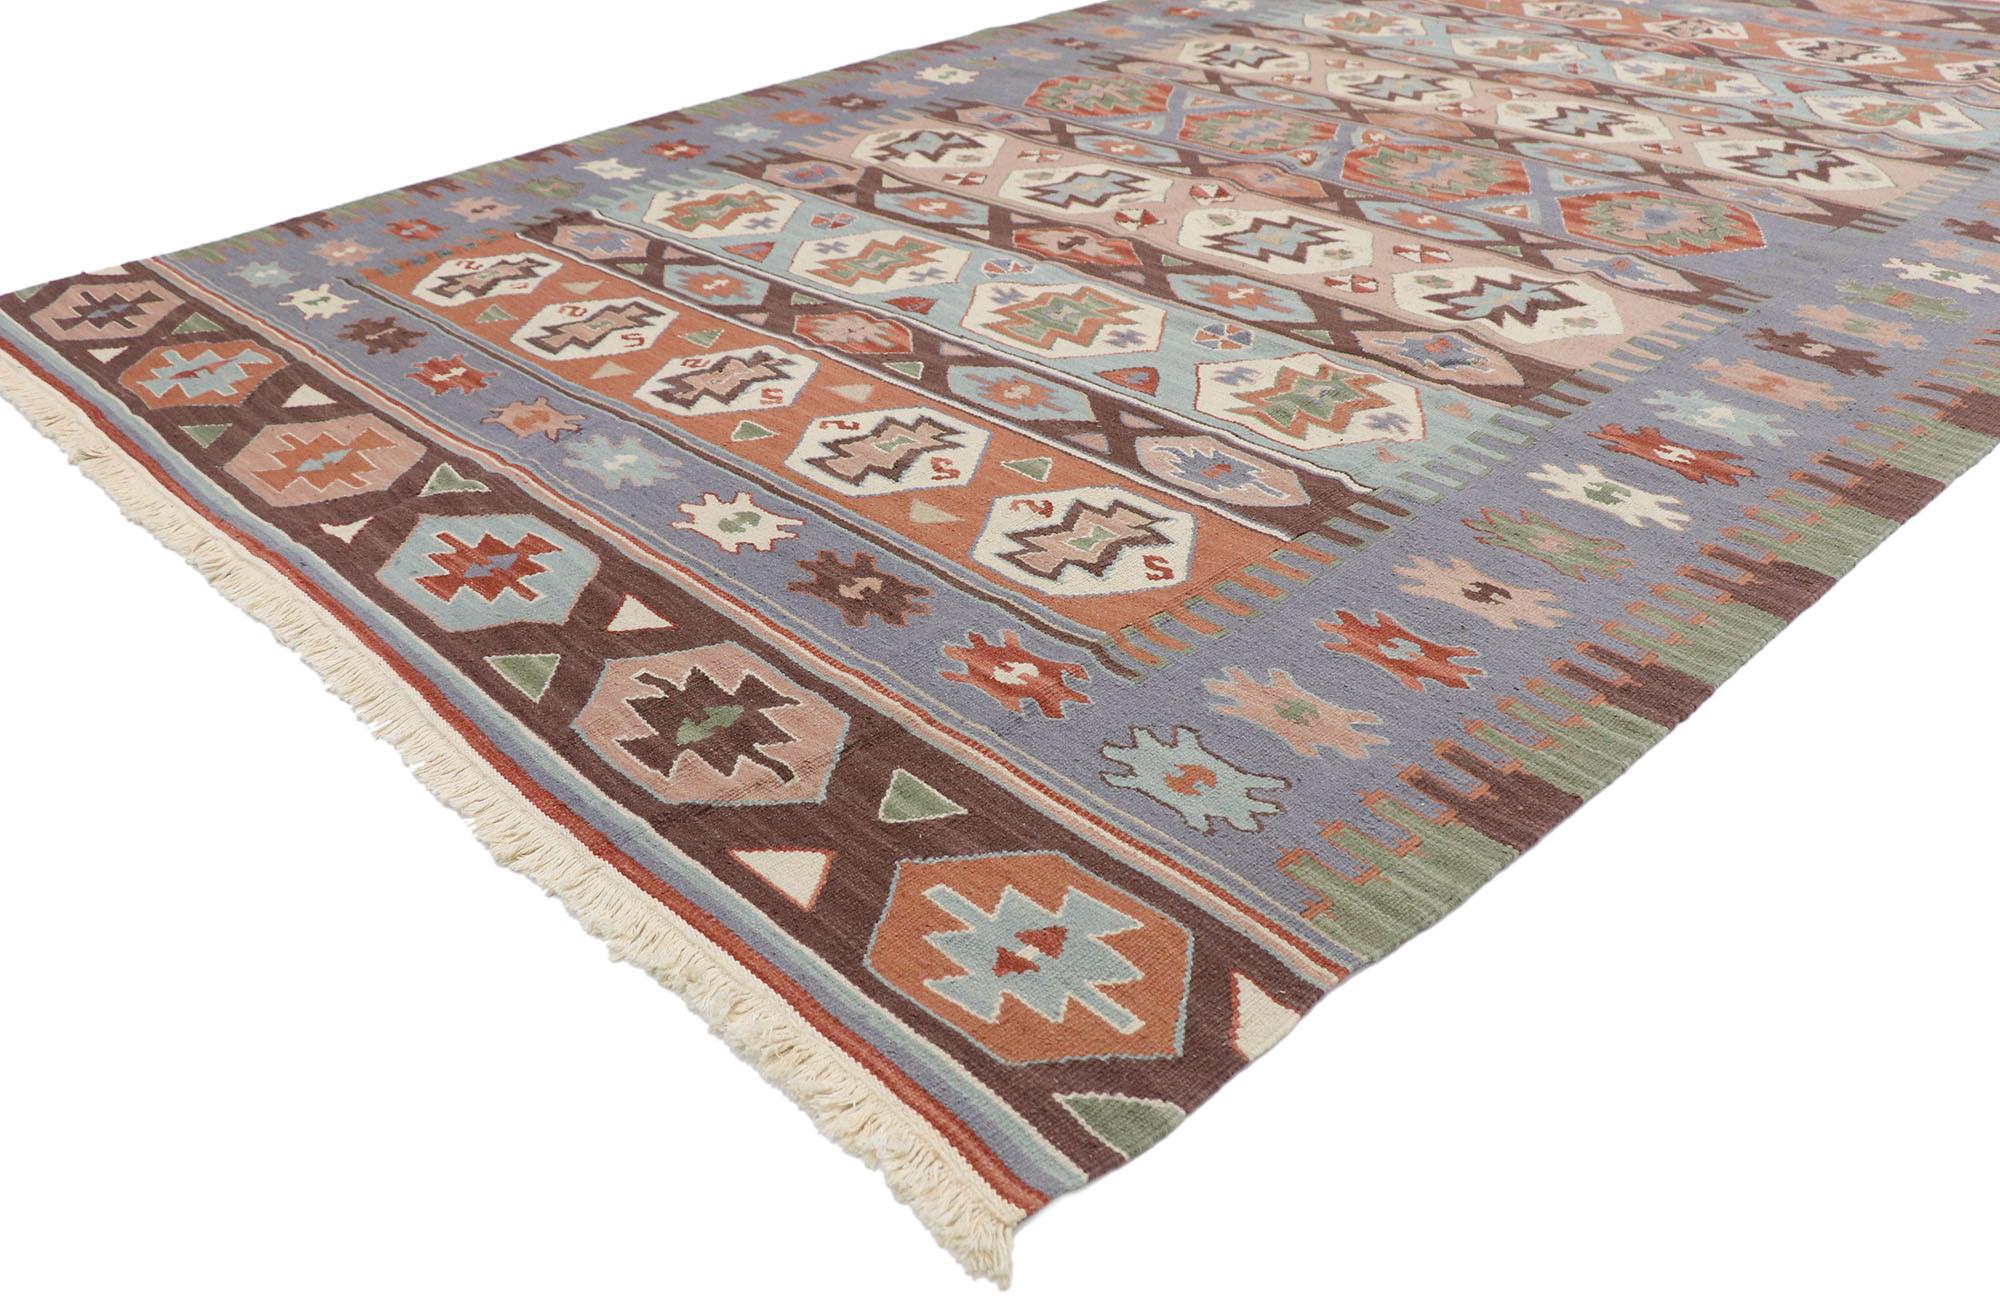 78054 Vintage Persian Shiraz Kilim rug with Boho Chic Tribal Style 05'07 x 08'08. Full of tiny details and a bold expressive design combined with contrasting colors and tribal style, this hand-woven wool vintage Persian Shiraz kilim rug is a